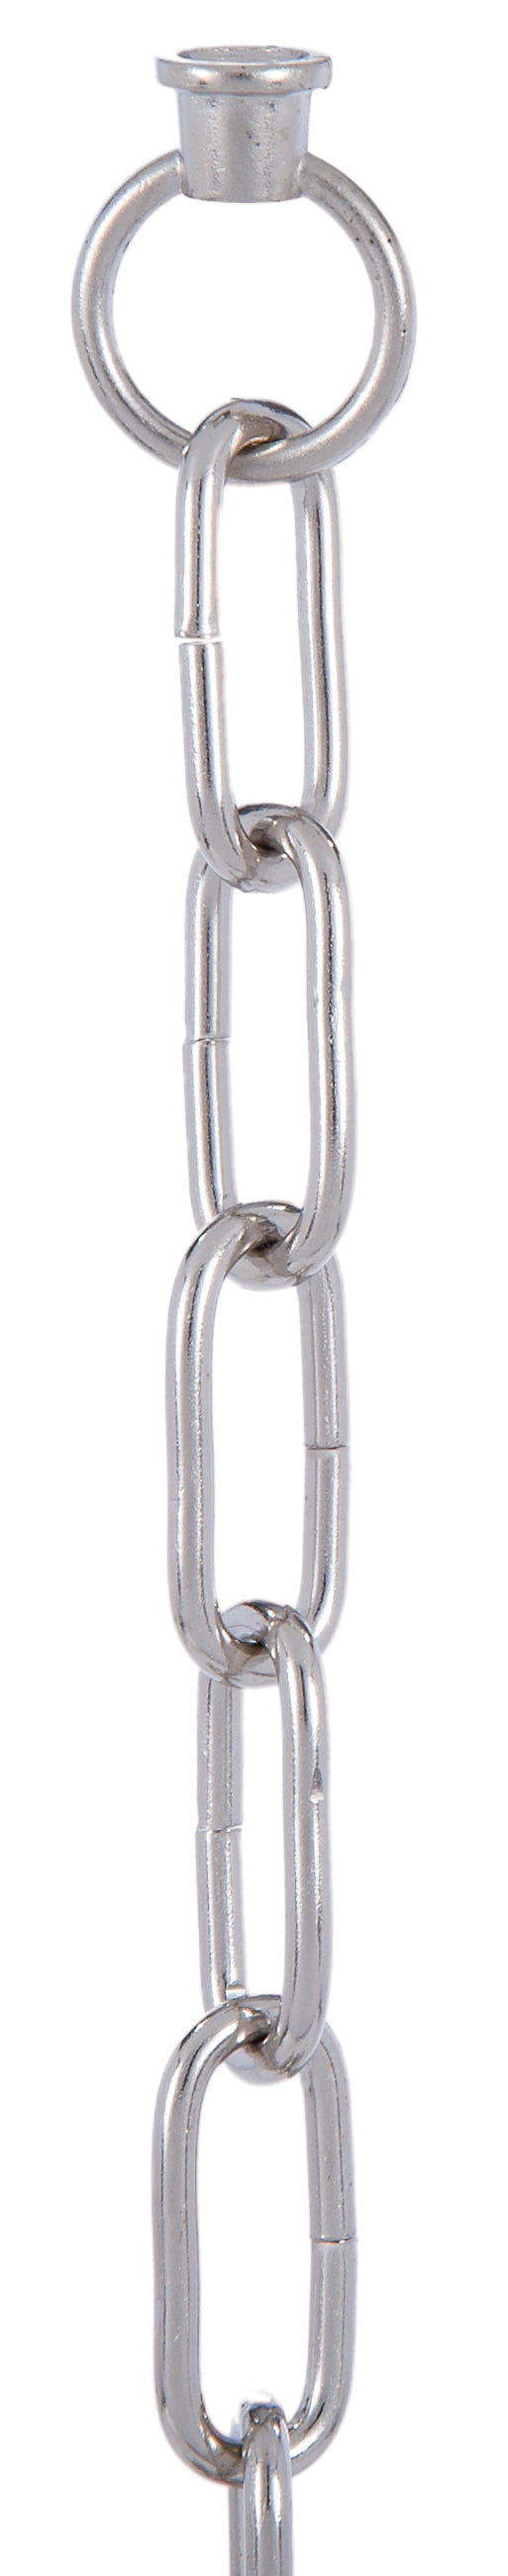 Nickel Plated Steel Chain with Connecting Loops